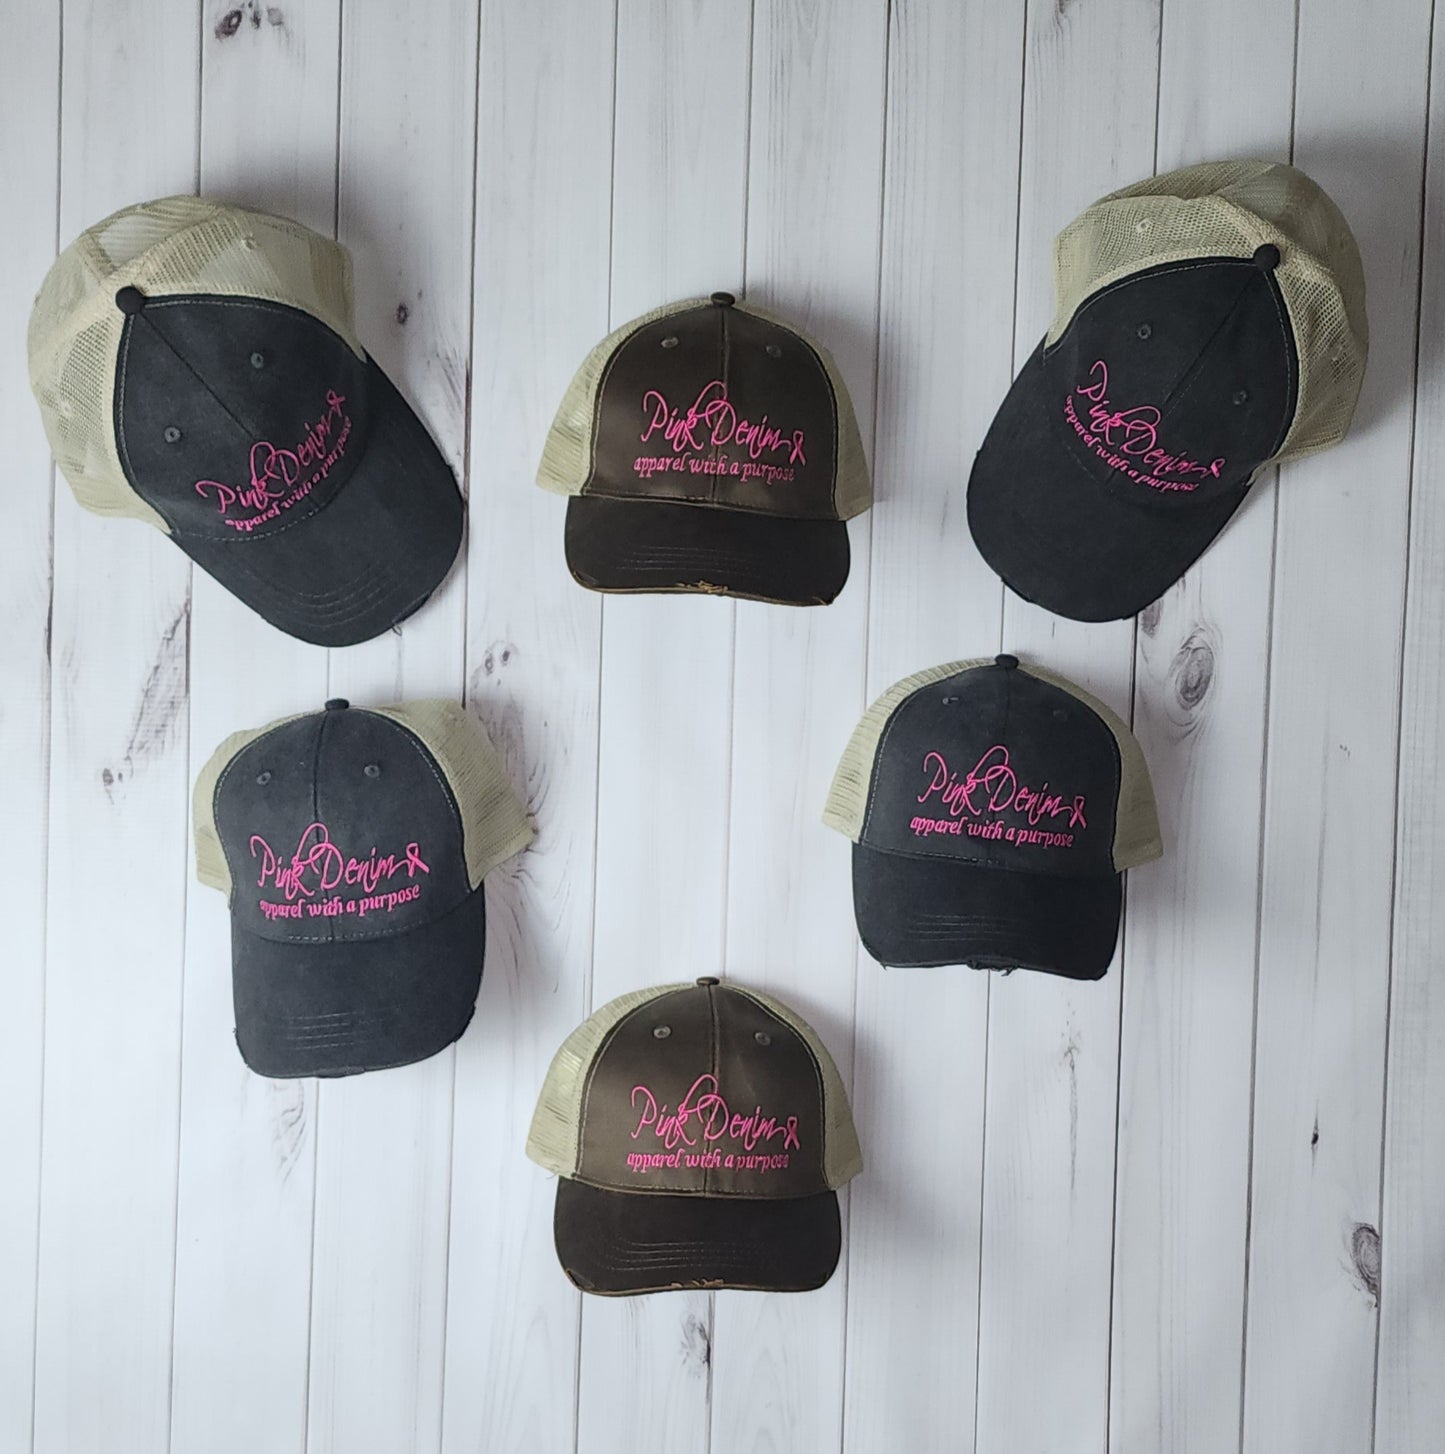 Pink Denim "apparel with a purpose" Distressed Trucker Hats